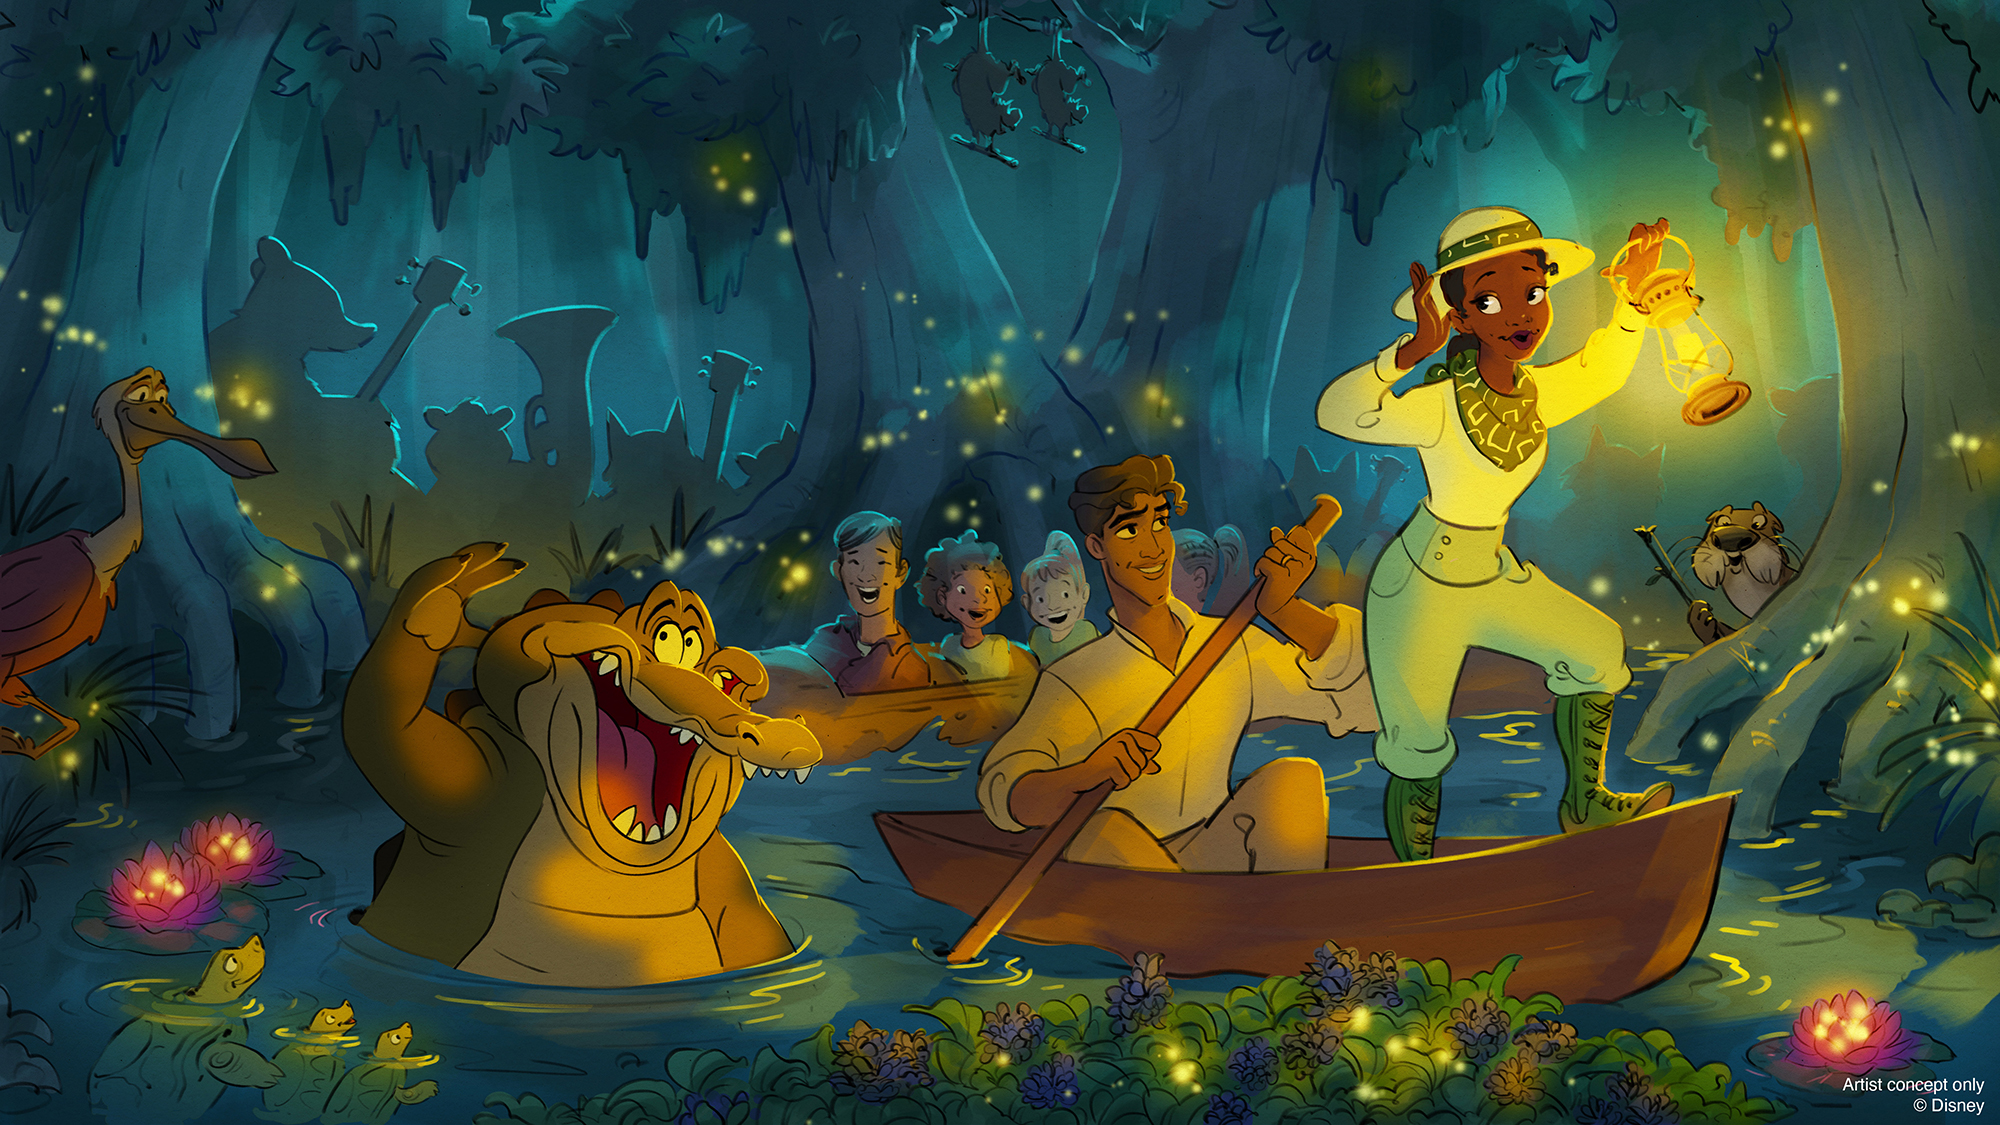 concept art from the Disney theme park ride Tiana’s Bayou Adventure: an illustration of Tiana from The Princess and the Frog holding a lantern at the front of a canoe as Prince Naveen rows the boat at night with all kinds of animals around them